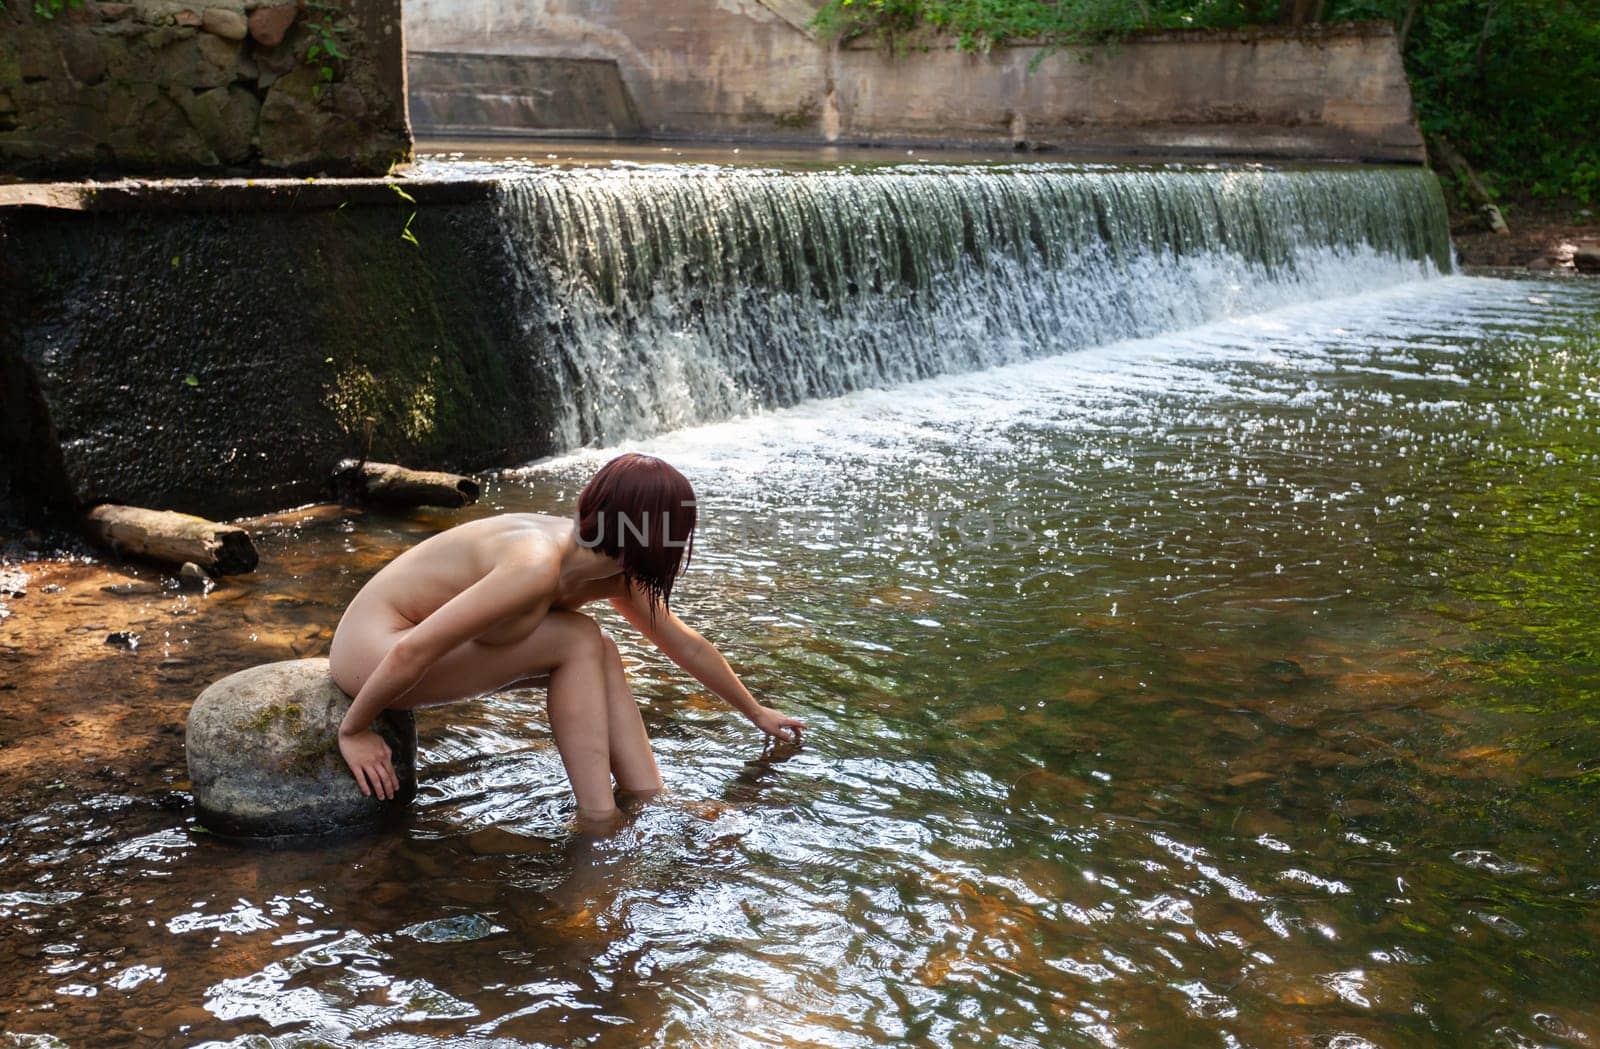 Young nude woman enjoying the fresh coolness near a forest stream with a waterfall